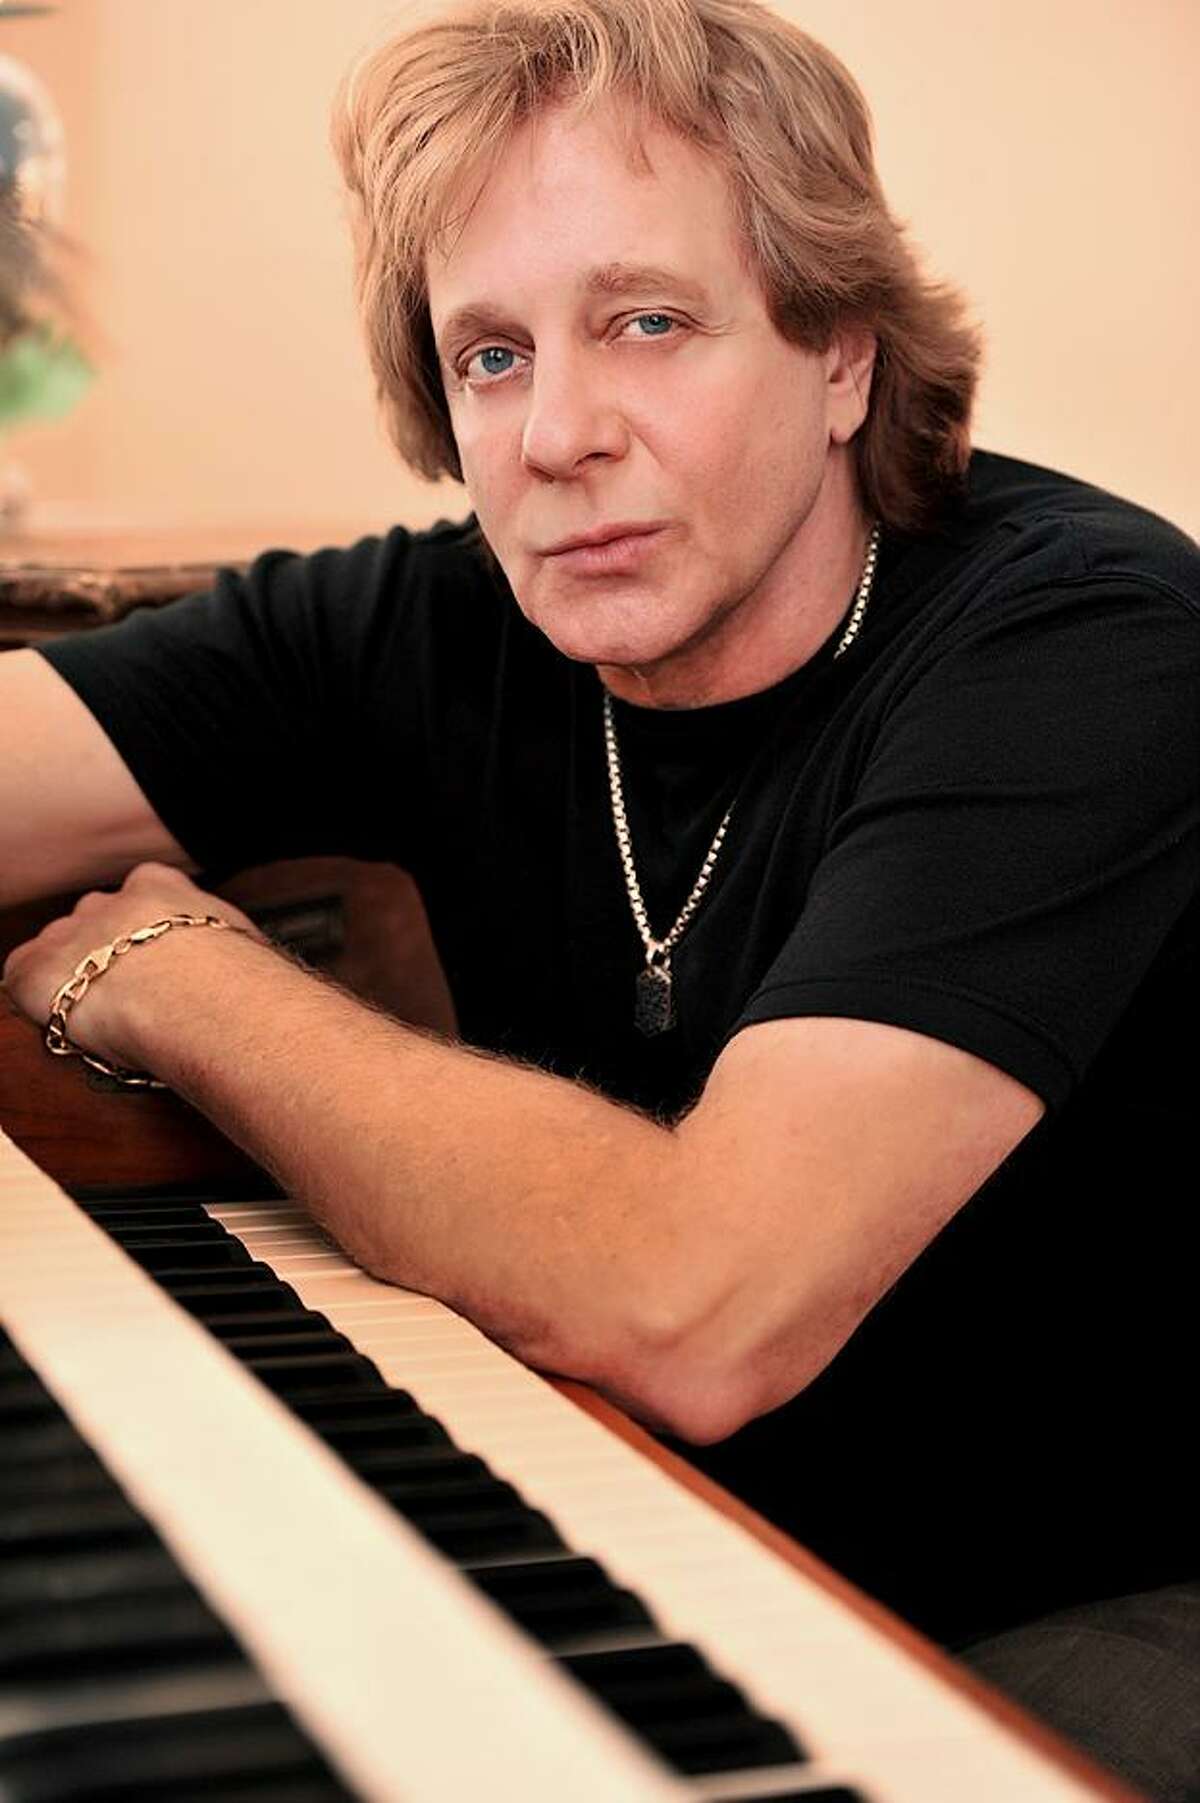 Eddie Money will headline the entertainment at the 44th annual Milford Oyster Festival on Saturday, Aug. 18. Opening act for Eddie Money will be the Beaver Brown Band. Among Eddie Money’s biggest hits were “Baby Hold On,” and “Two Tickets Paradise.